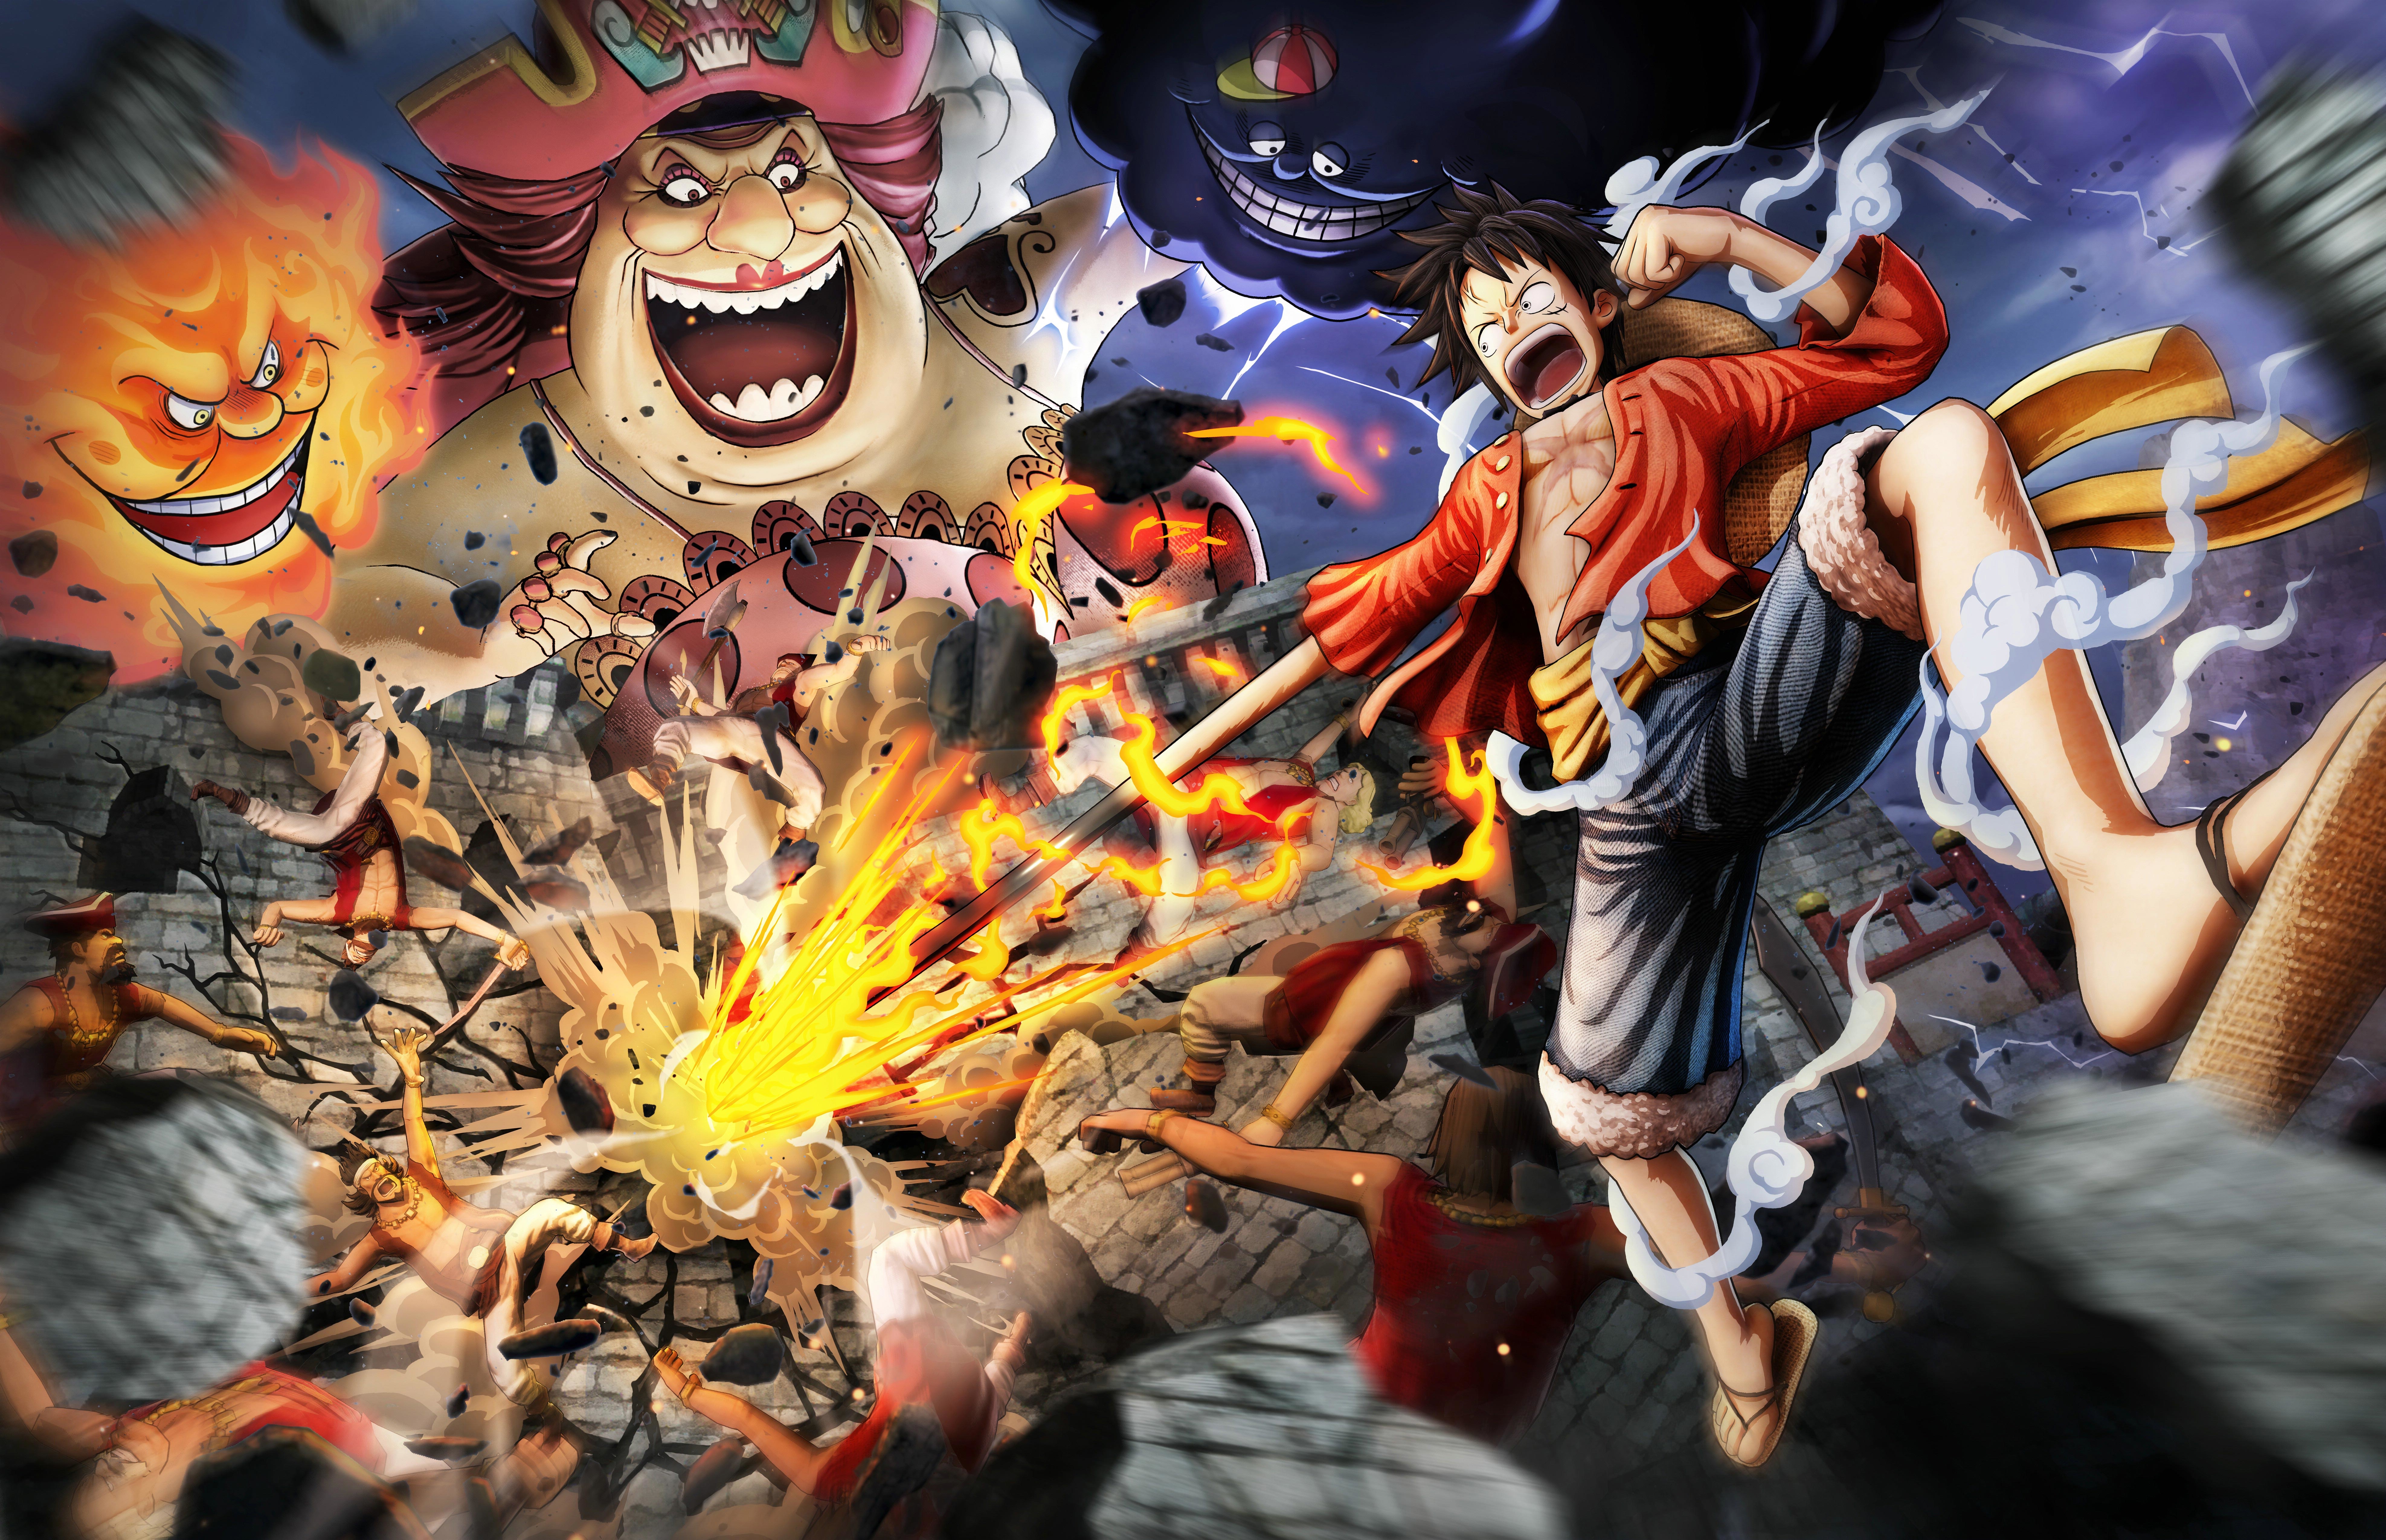 1242x26 One Piece Pirate Warriors Iphone Xs Max Wallpaper Hd Games 4k Wallpapers Images Photos And Background